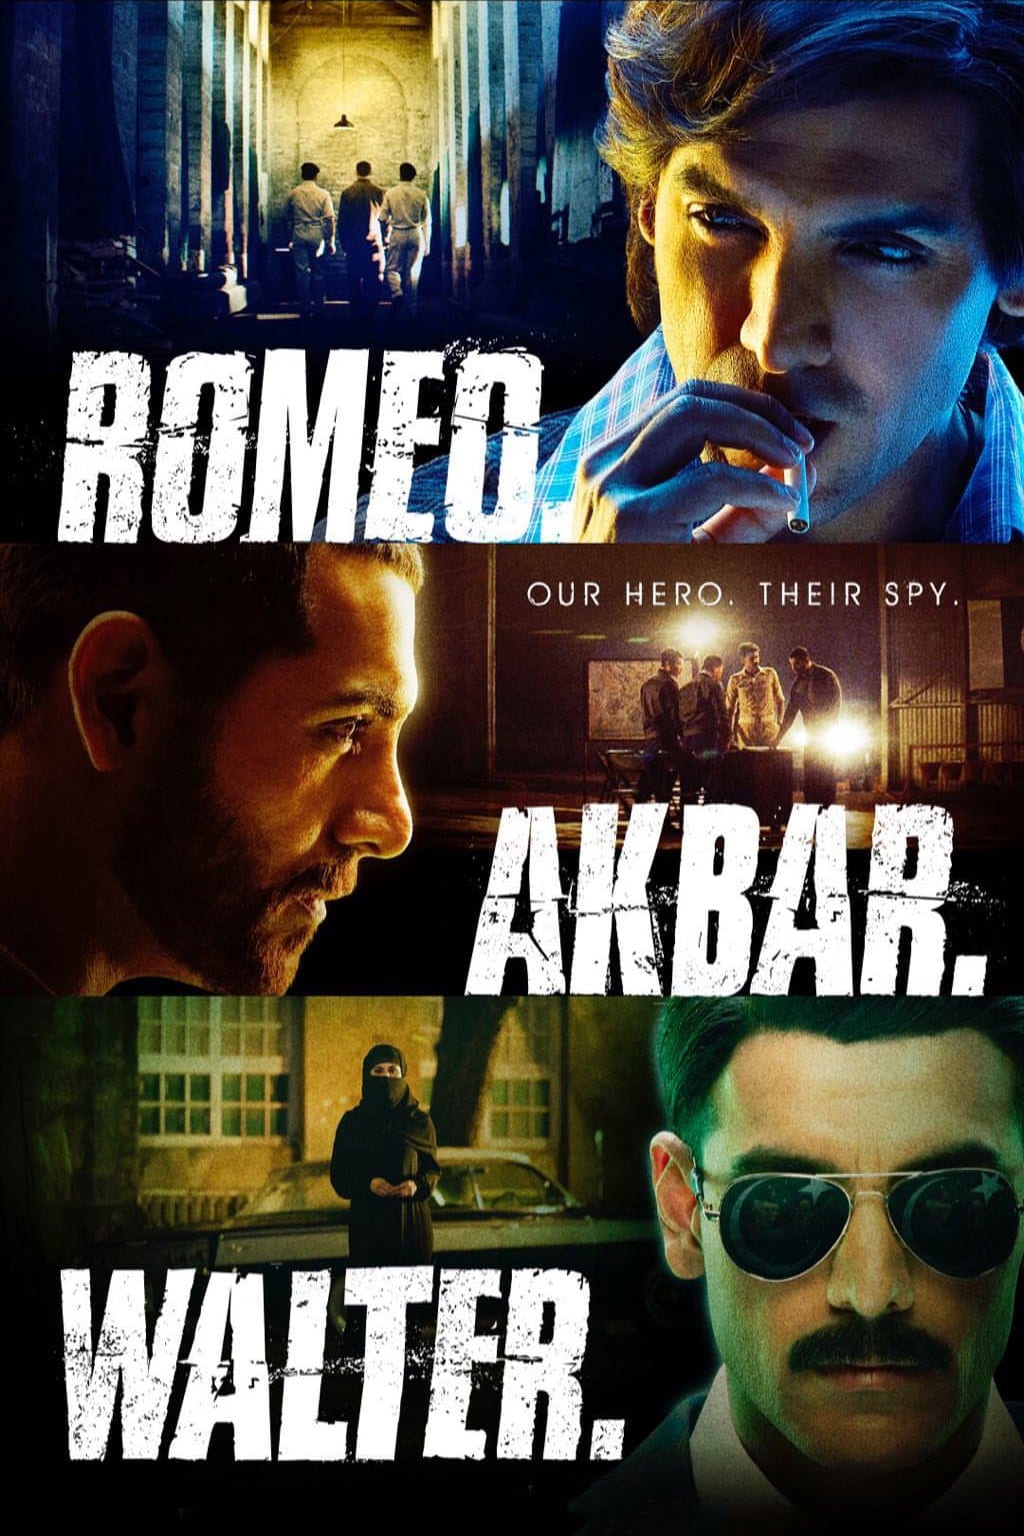 Poster for the movie "Romeo Akbar Walter"